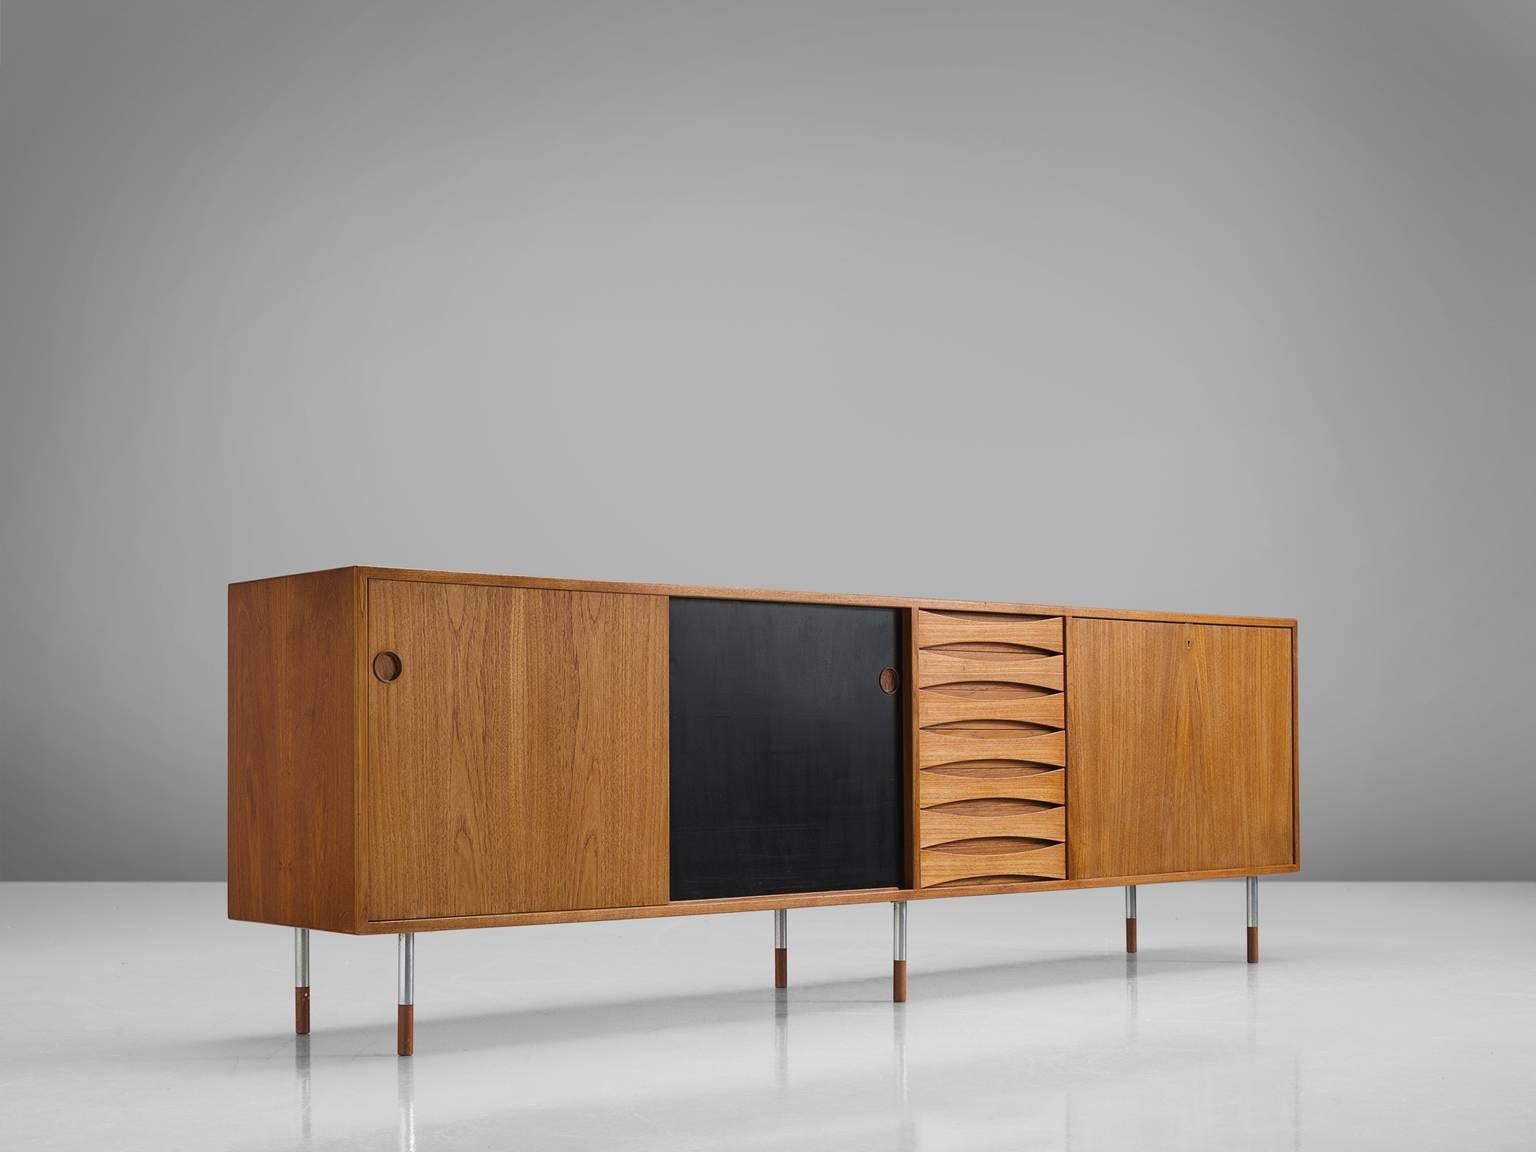 Arne Vodder for P. Olsen Sibast Møbler, Credenza model 29A, in teak and metal, by Denmark, 1959.

This iconic sideboard in teak is designed by the Danish designer Arne Vodder. The typical refined Vodder details can be found on this sideboard such as